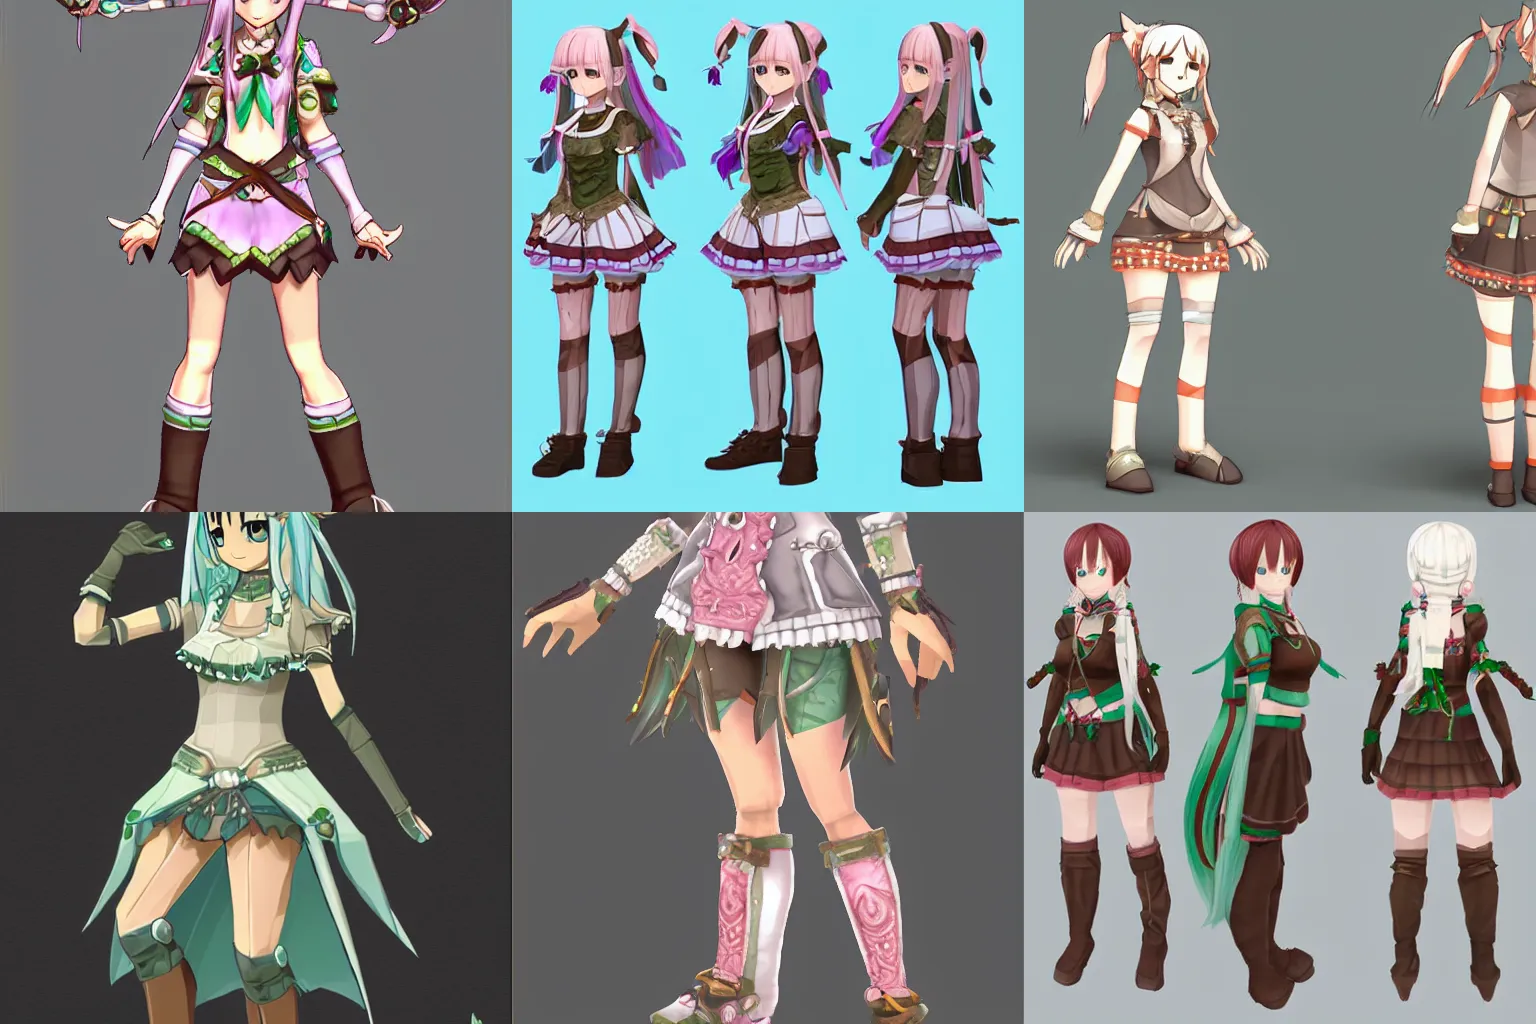 Prompt: 3d character, art style of Rune Factory 5, female, hand painted, full body adoptable, low poly, pigtails, intricate details, fantasy